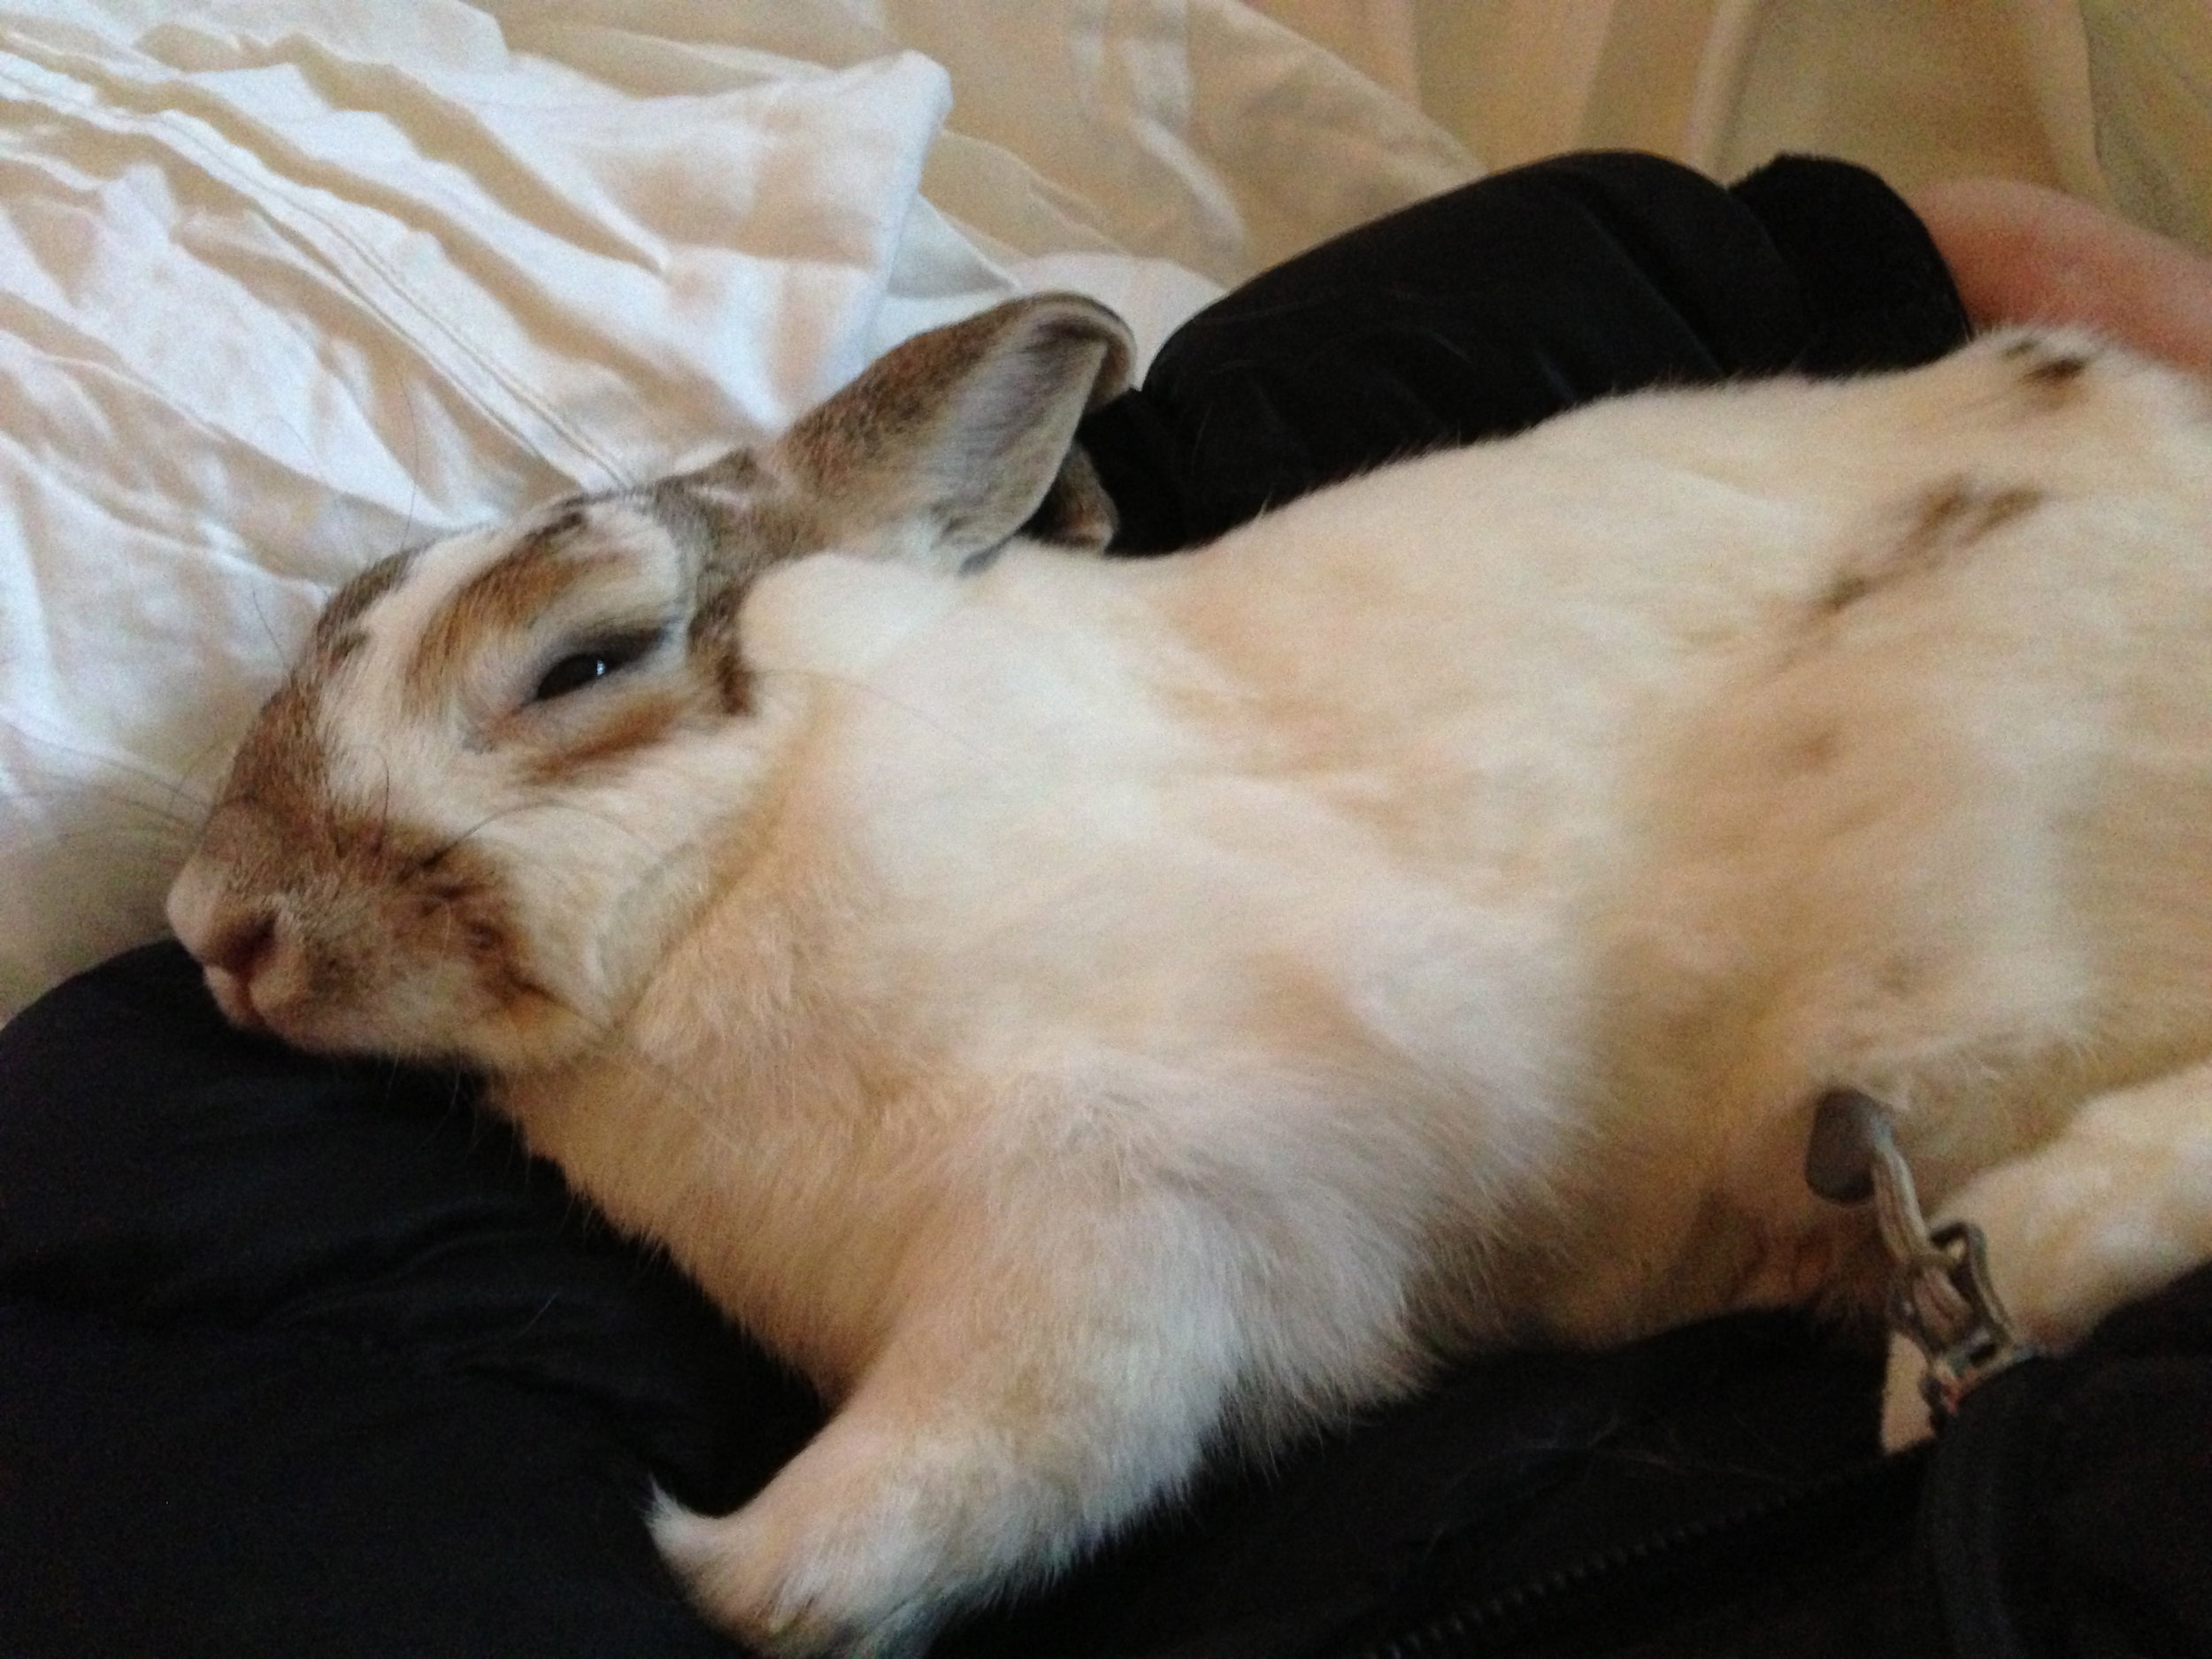 Bunny Cuddles Up with Her Human for a Nap